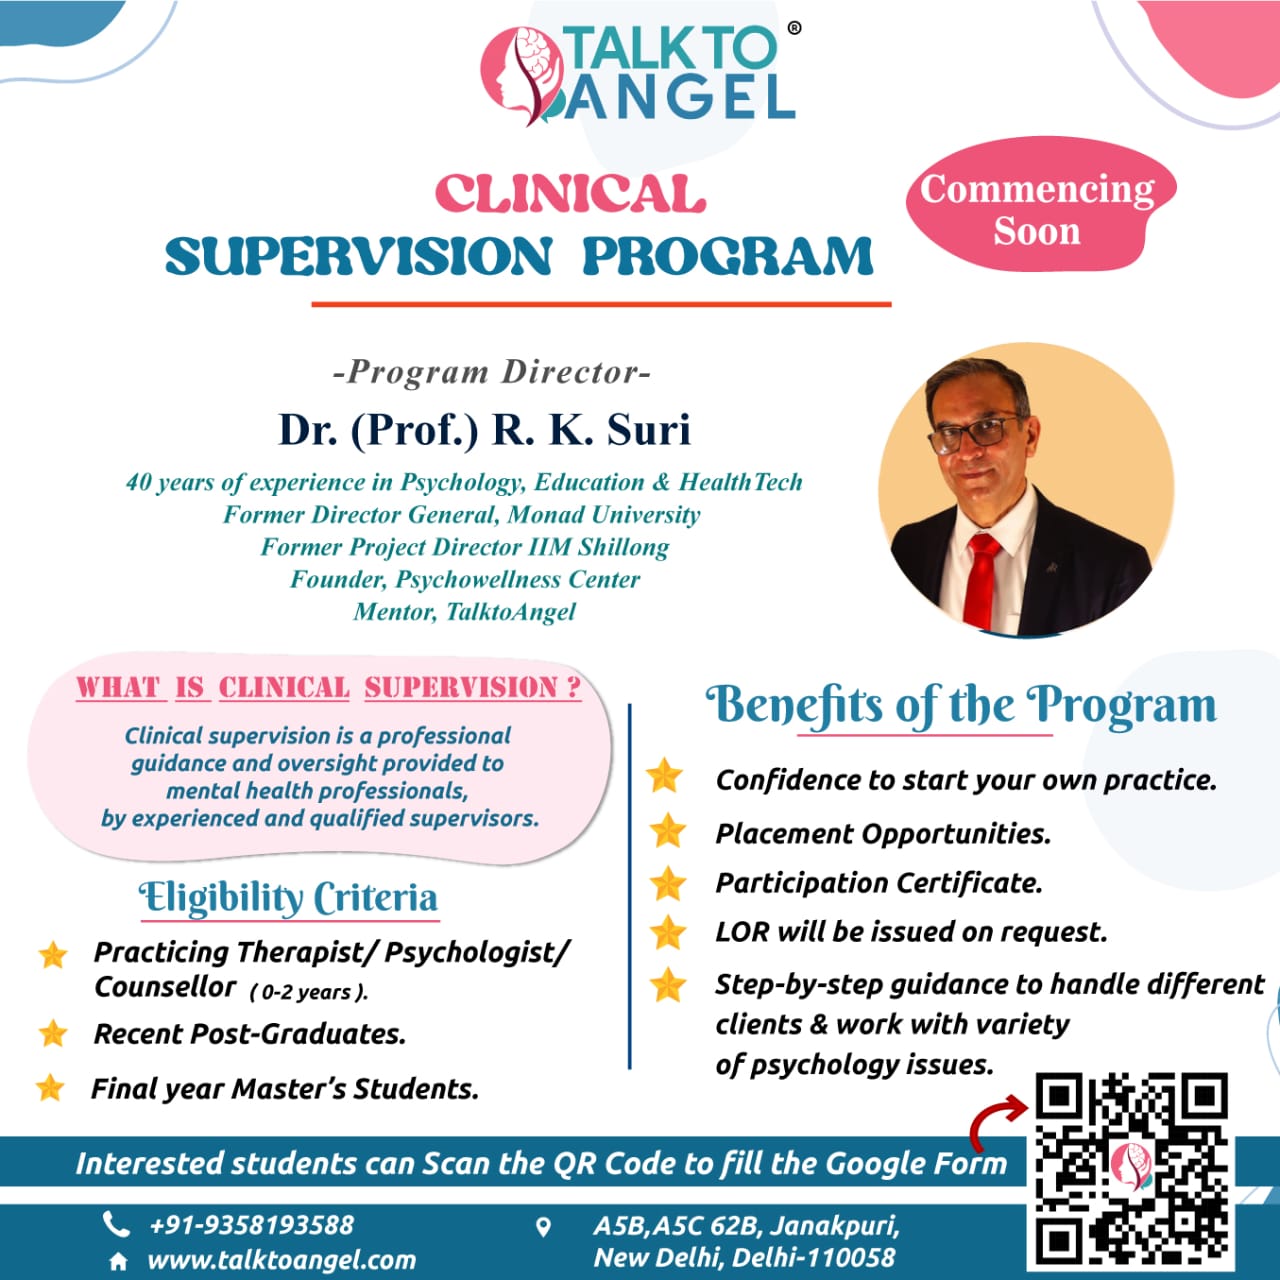 How to join an Effective Clinical Supervision Program